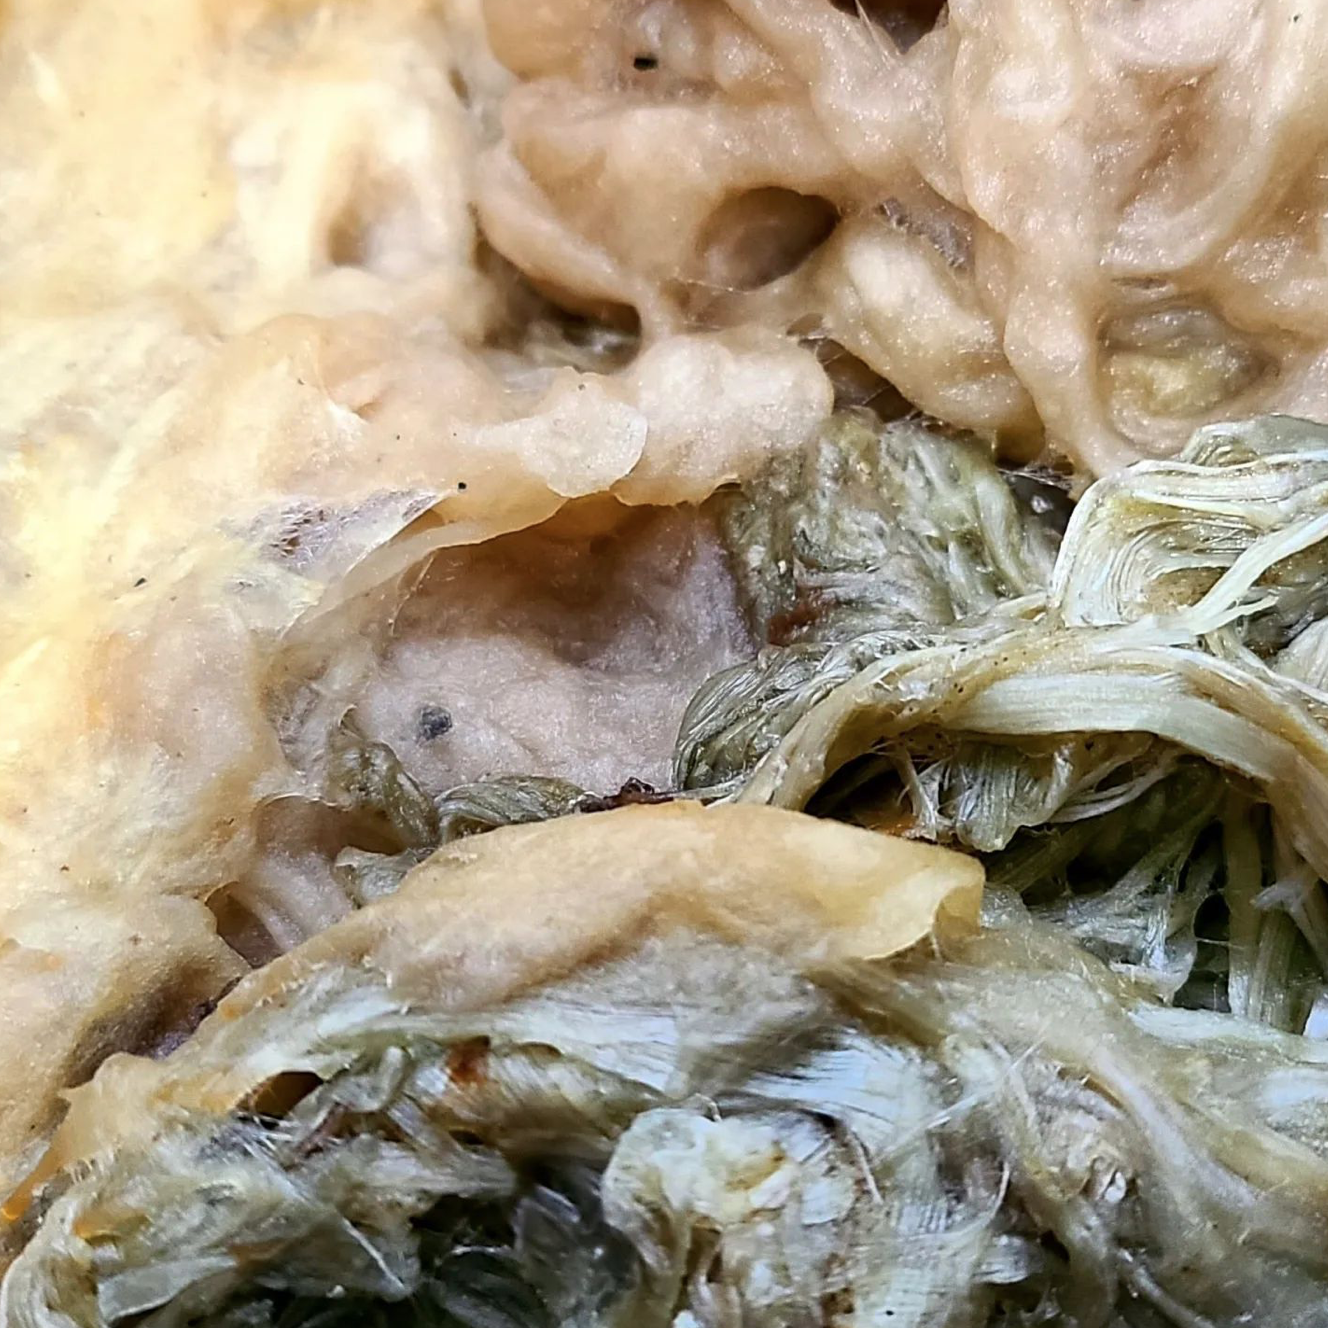  Finally done cooking/rinsing the fibers for my next batch of paper! I threw in milkweed bast fibers (greenish fibers) and milkweed seed fluff/floss (golden fibers) with the last of the kapok. 